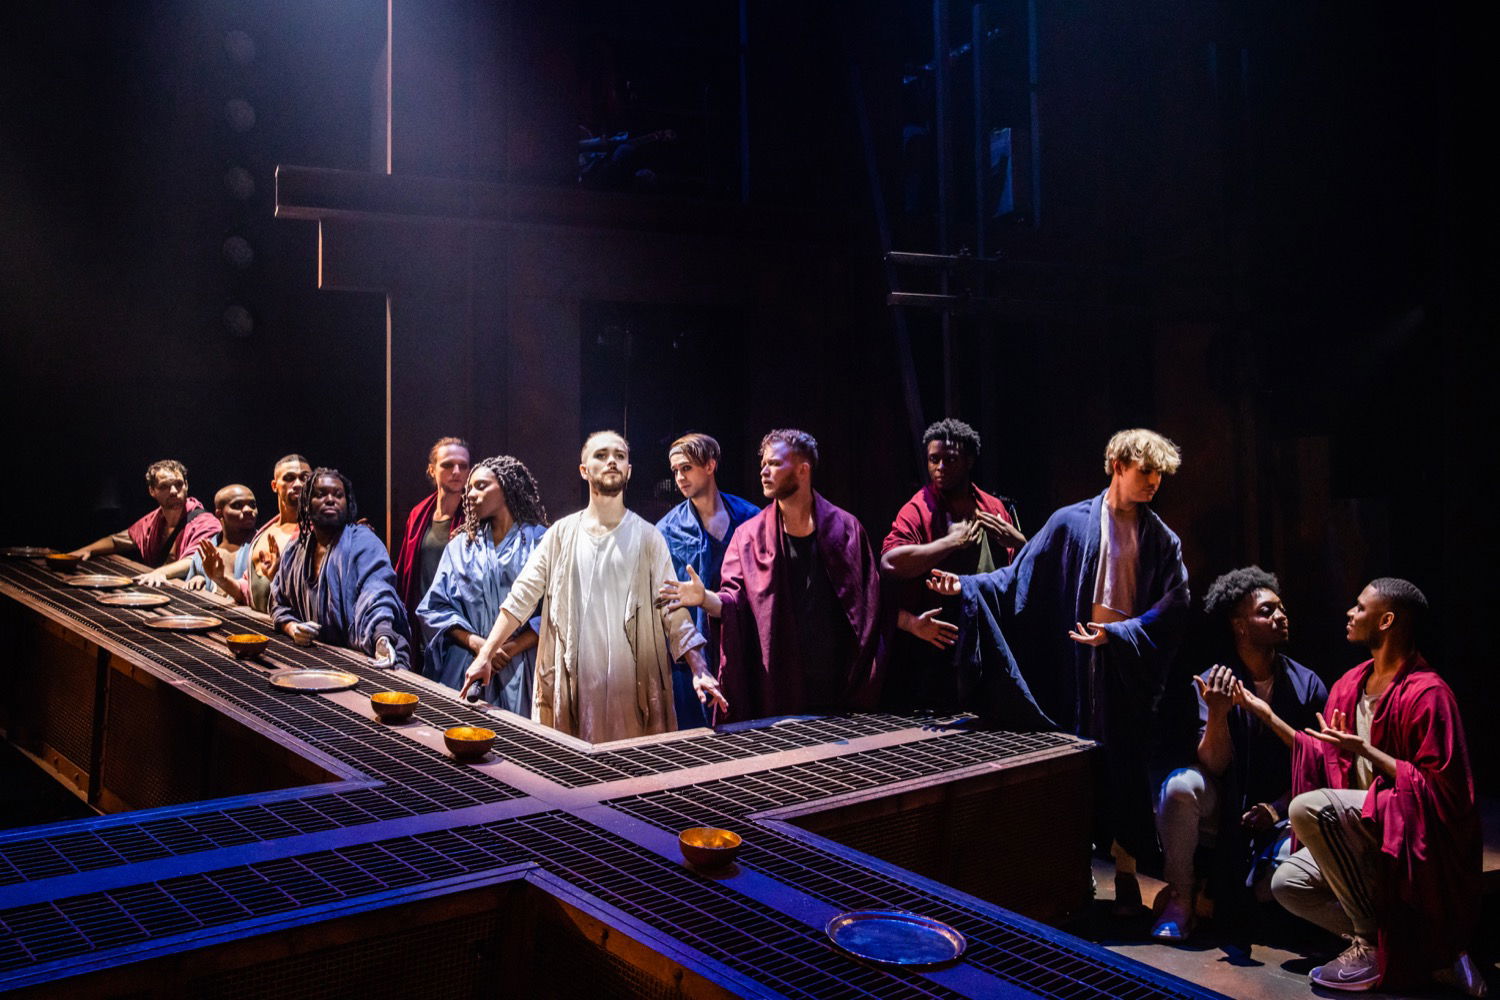 "Jesus Christ Superstar" - by Tim Rice and Andrew Lloyd Webber - Hanover Theatre for the Performing Arts (Worcester, MA.) - REVIEW